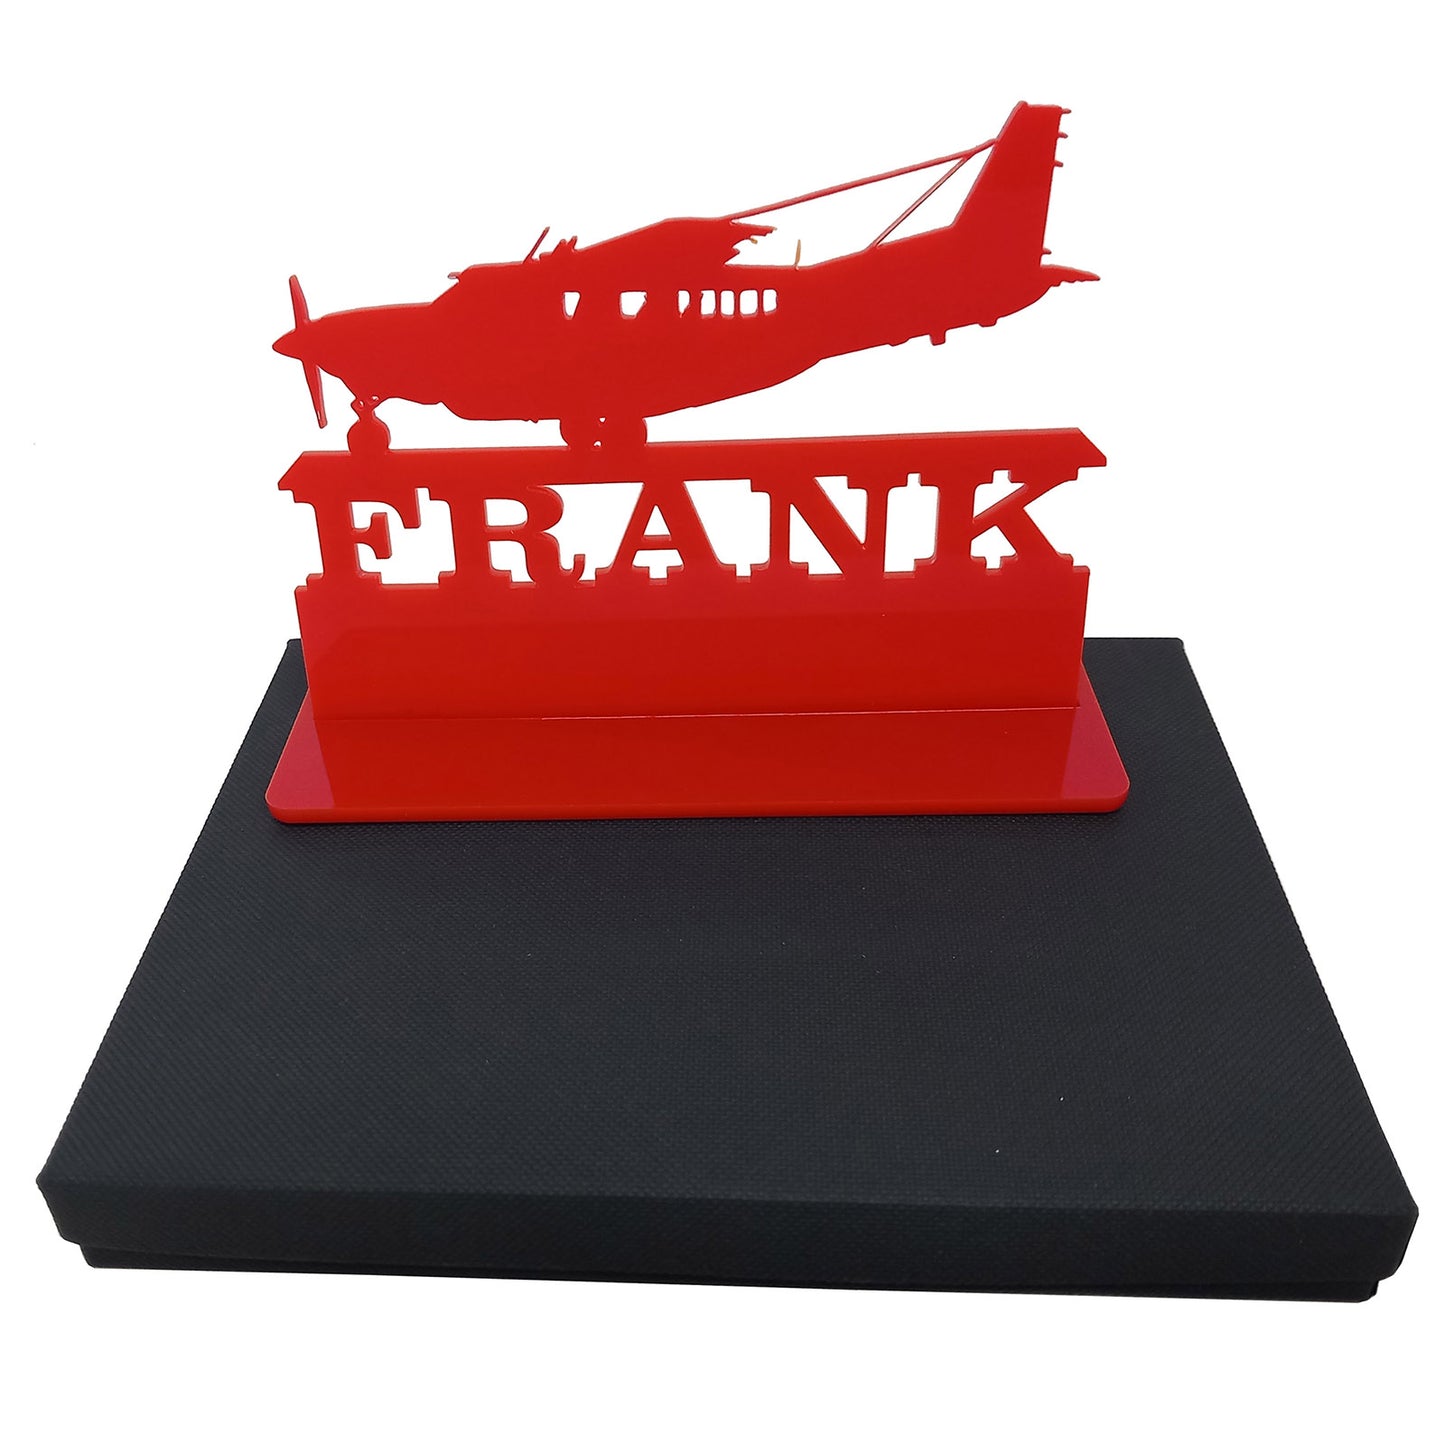 Acrylic personalized aviation gifts for pilots and enthusiasts. Standalone keepsake ornaments.